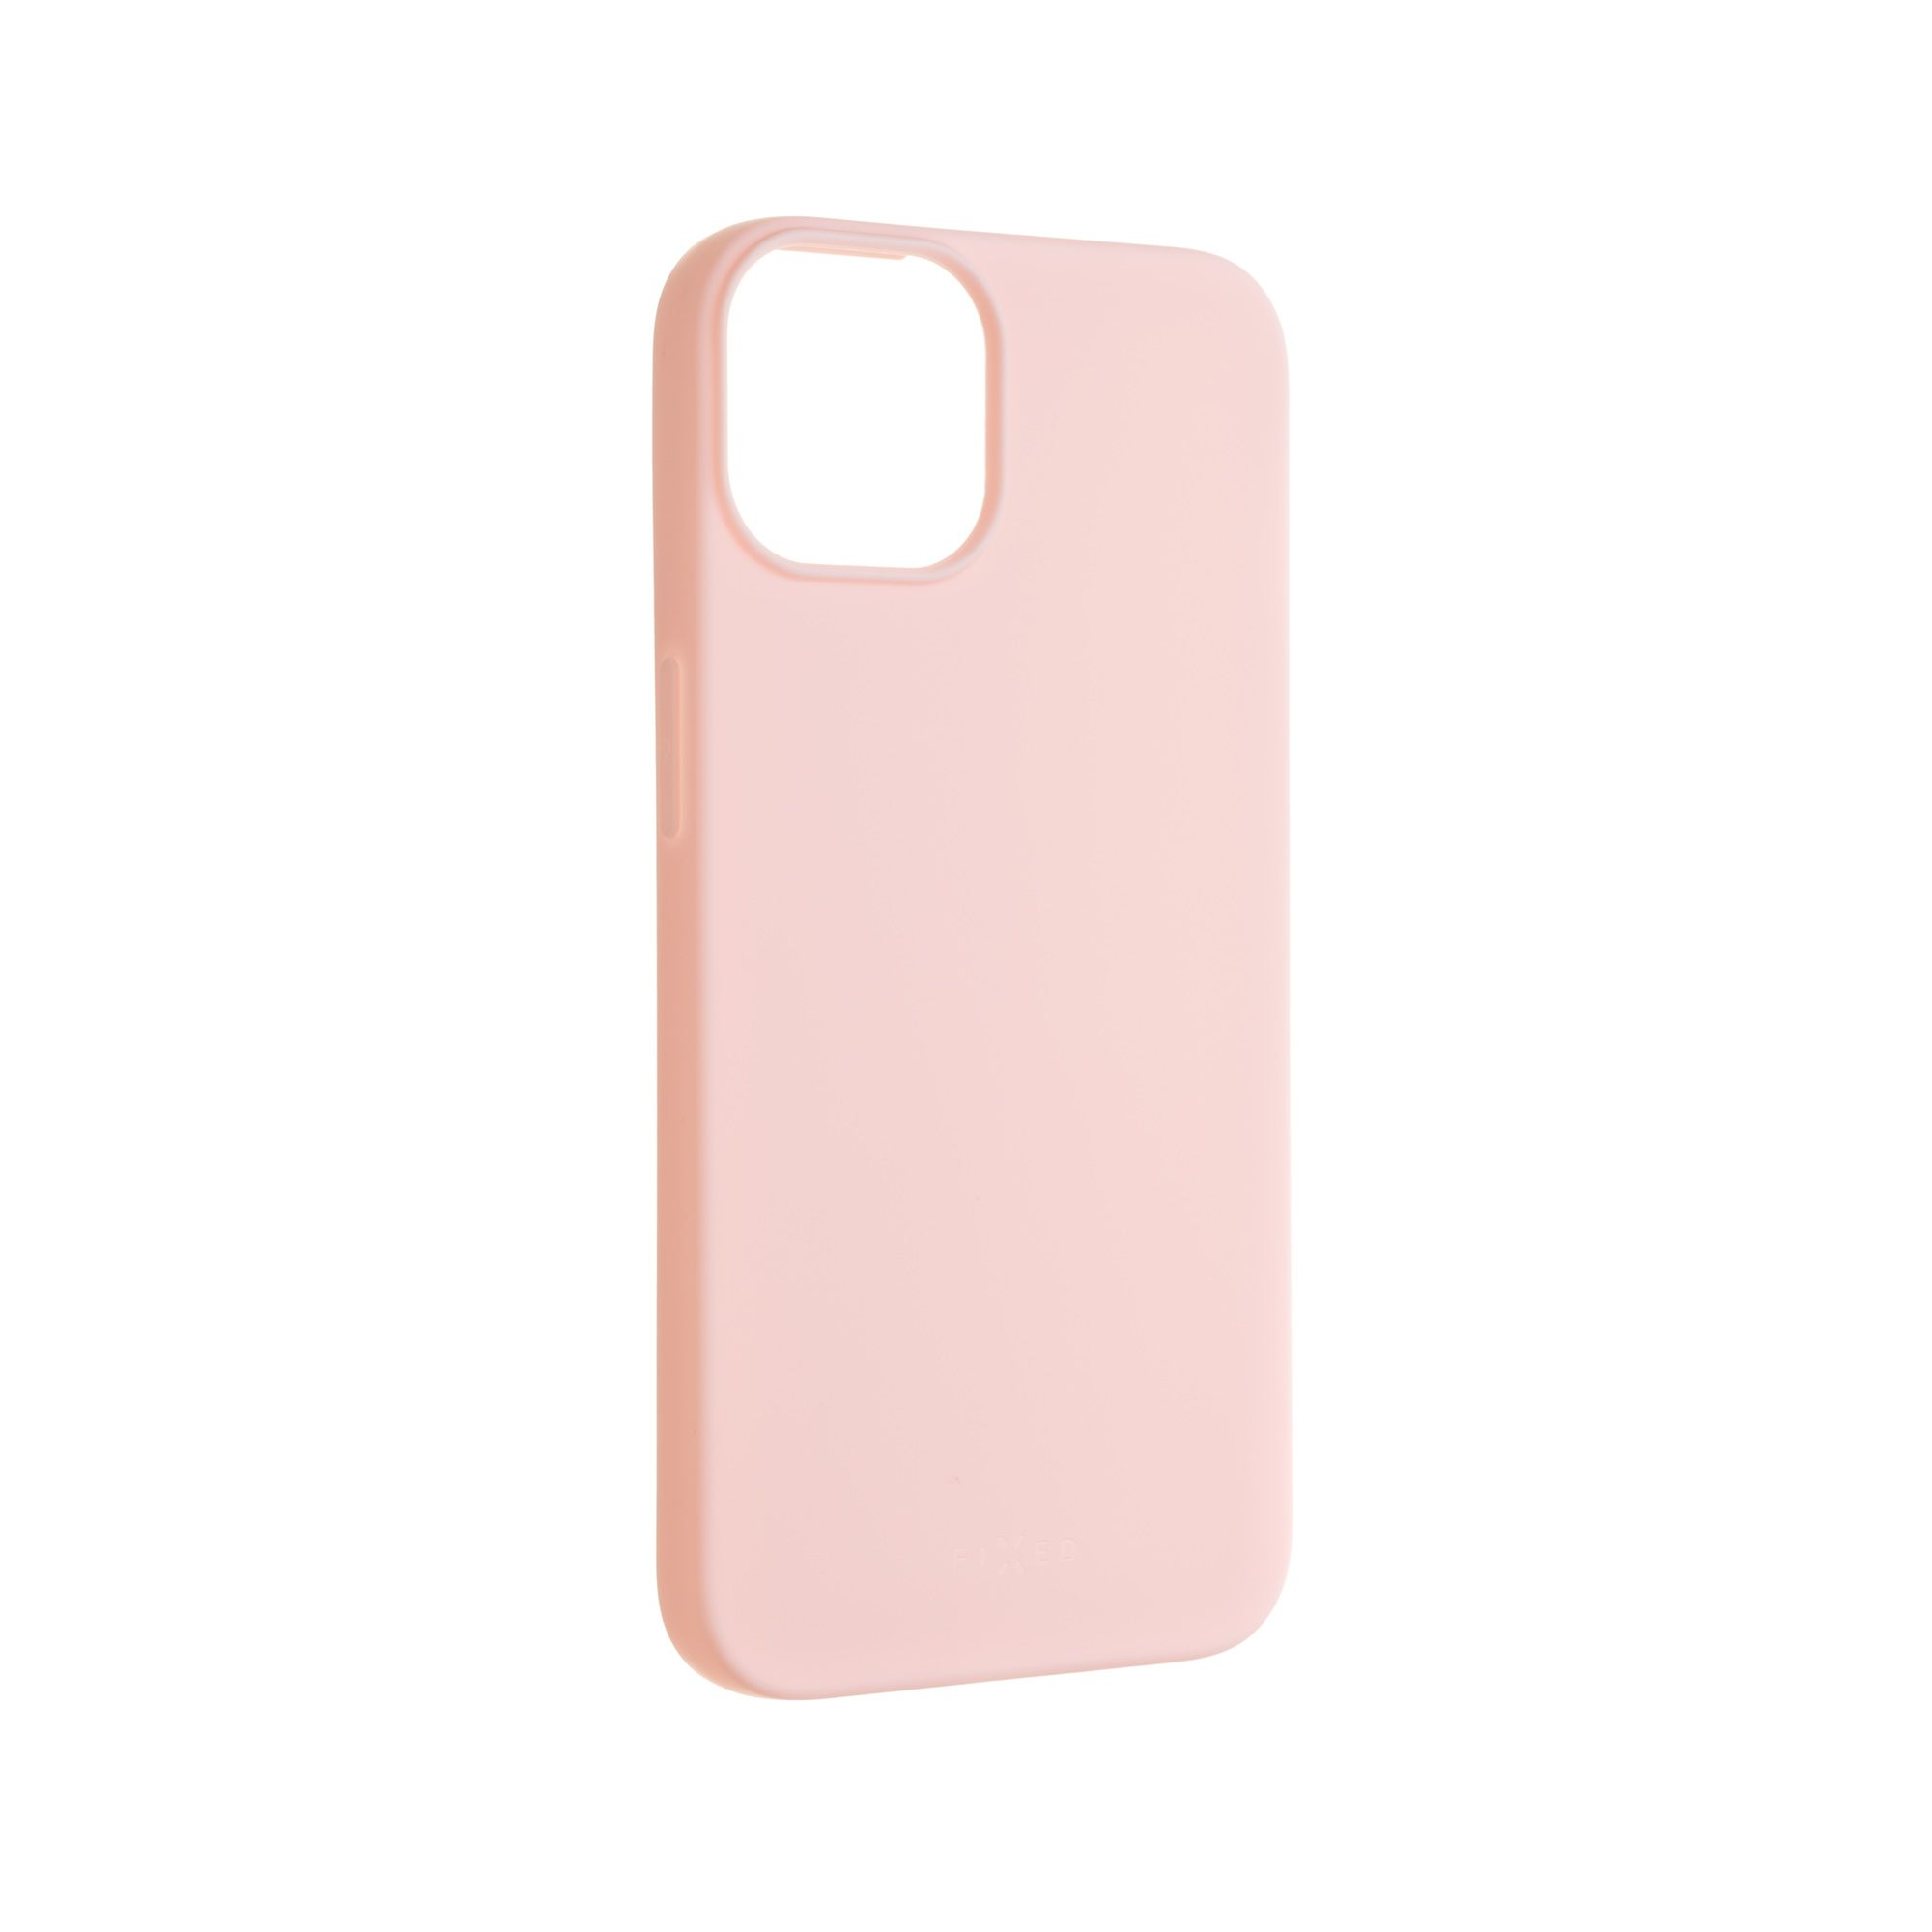 13, iPhone Backcover, FIXED Rosa Apple, FIXST-723-PK,